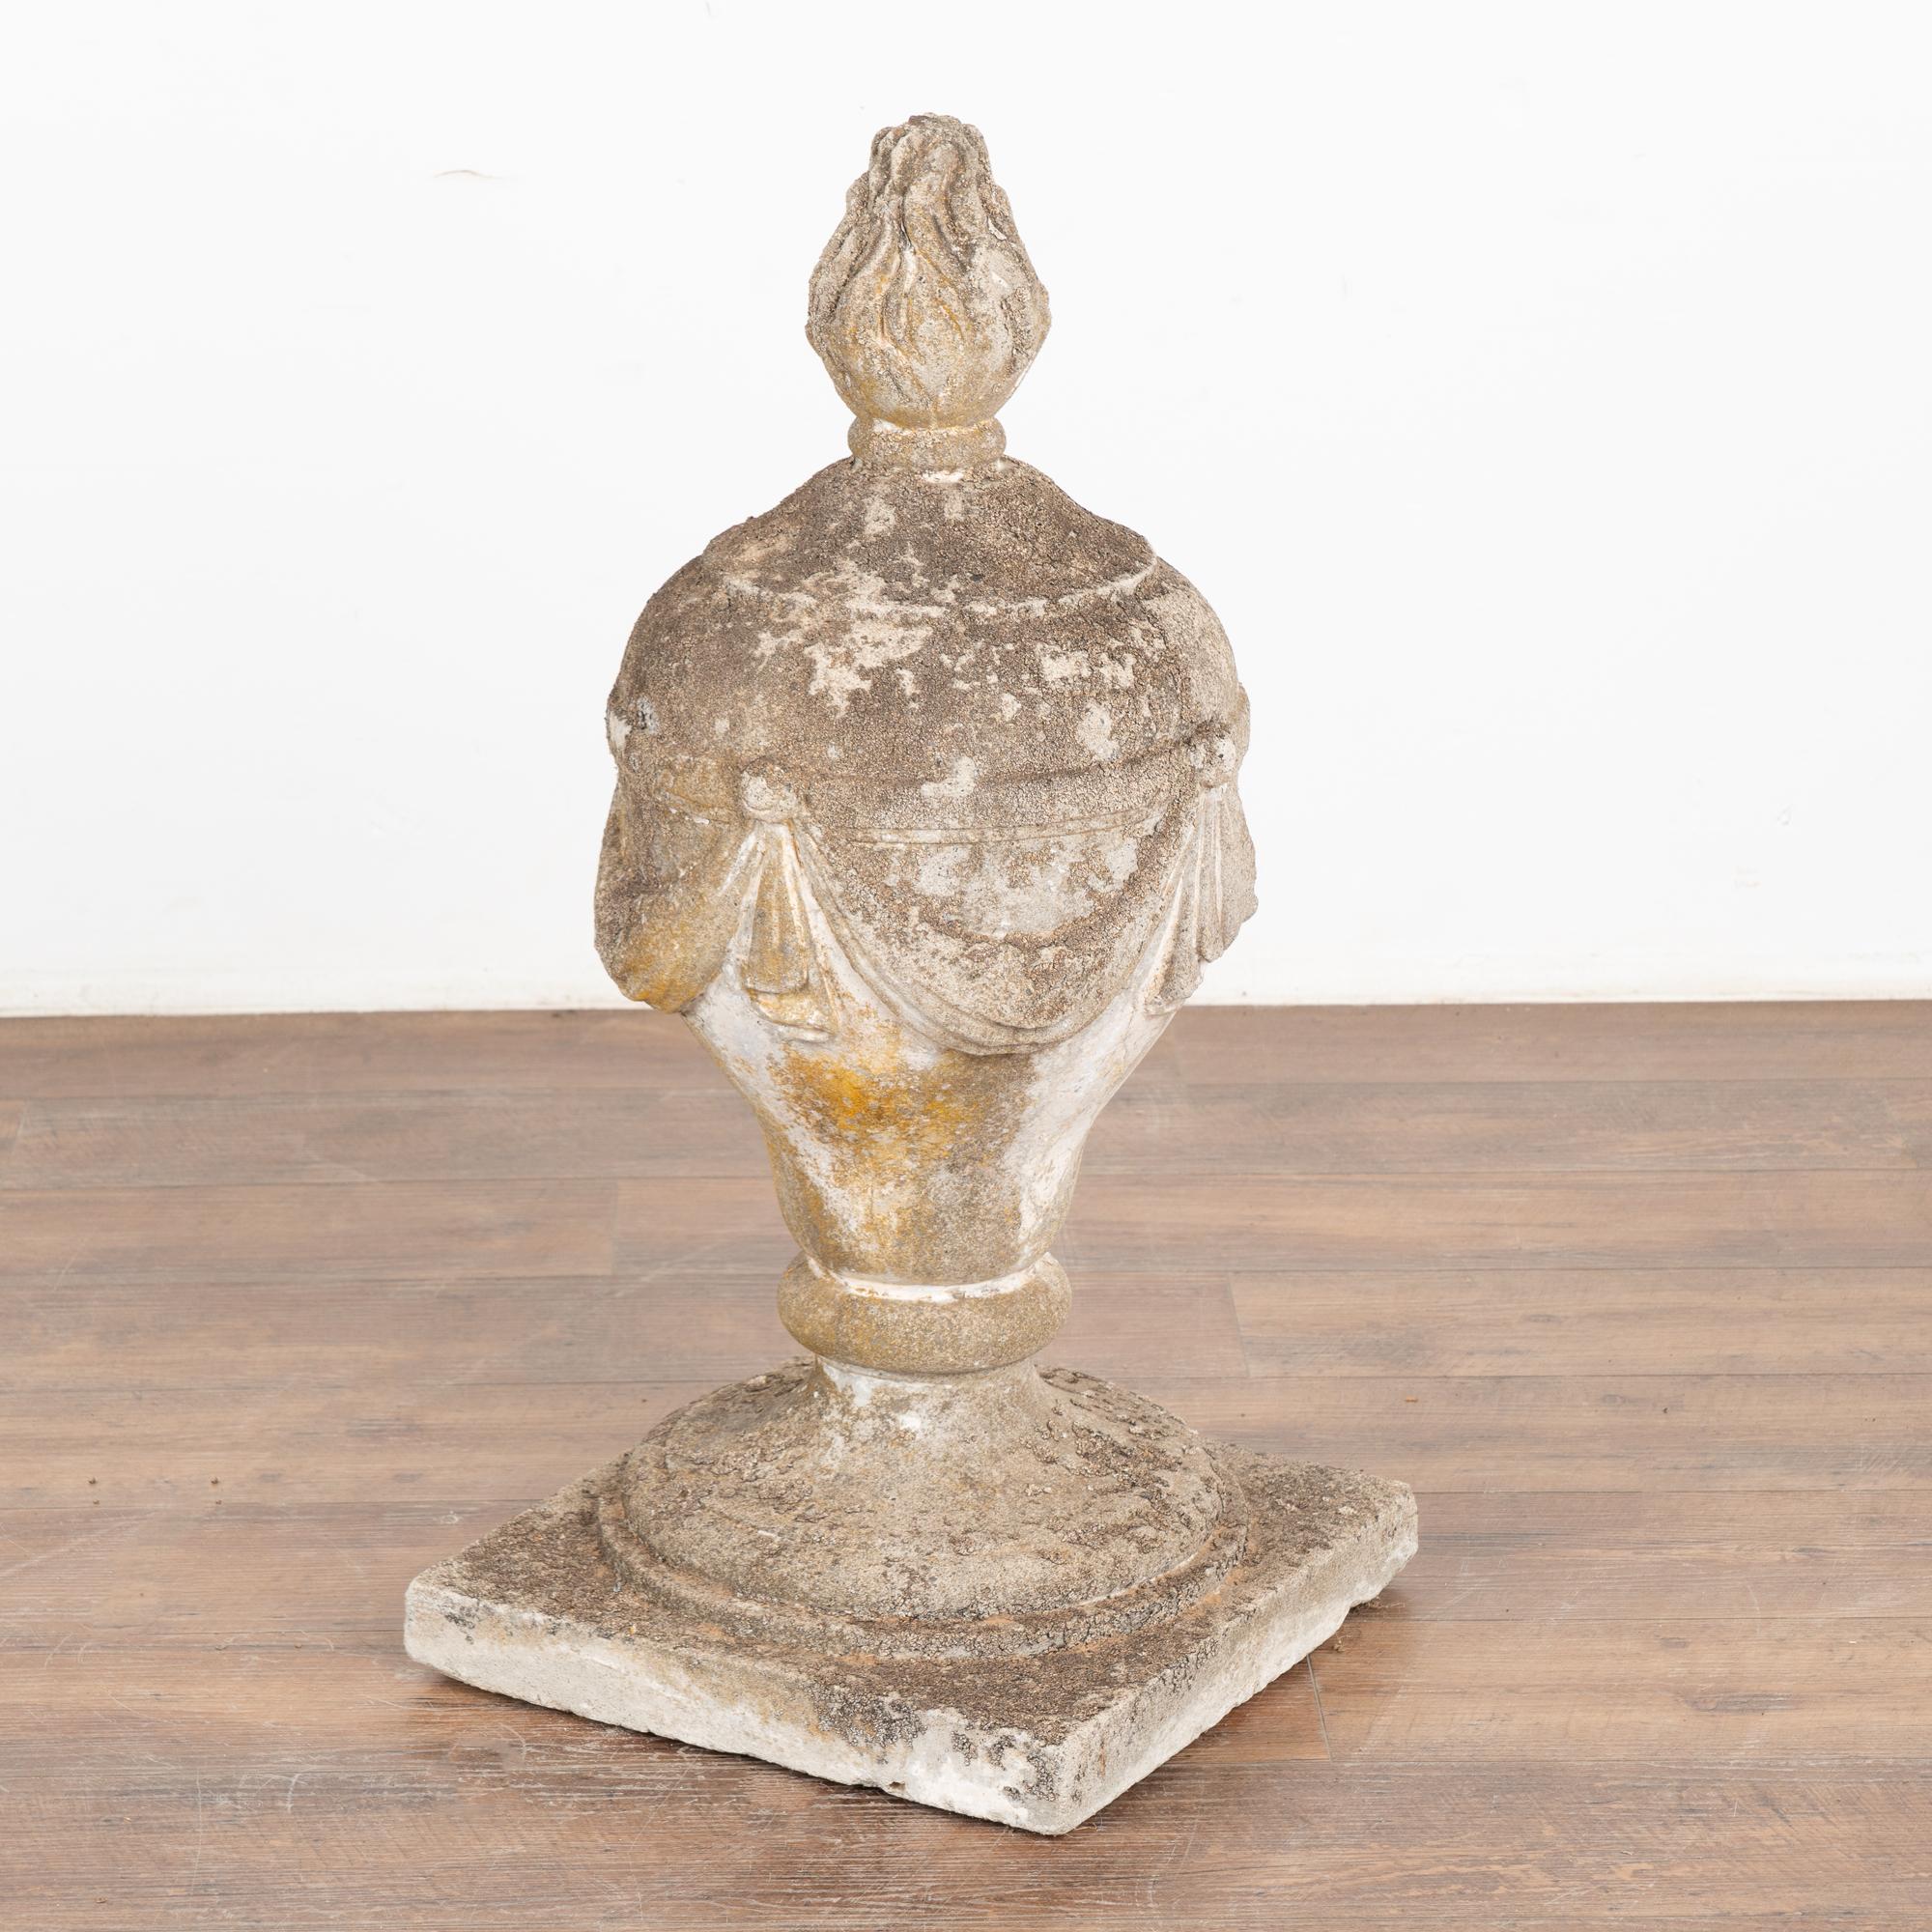 French limestone garden sculpture/finial. 
The aged patina including distress to finish, wear, old lichen/stains, minor cracks, all reflect generations of sitting outside in the elements resulting in an authentic aged appeal.

With over 37 years of